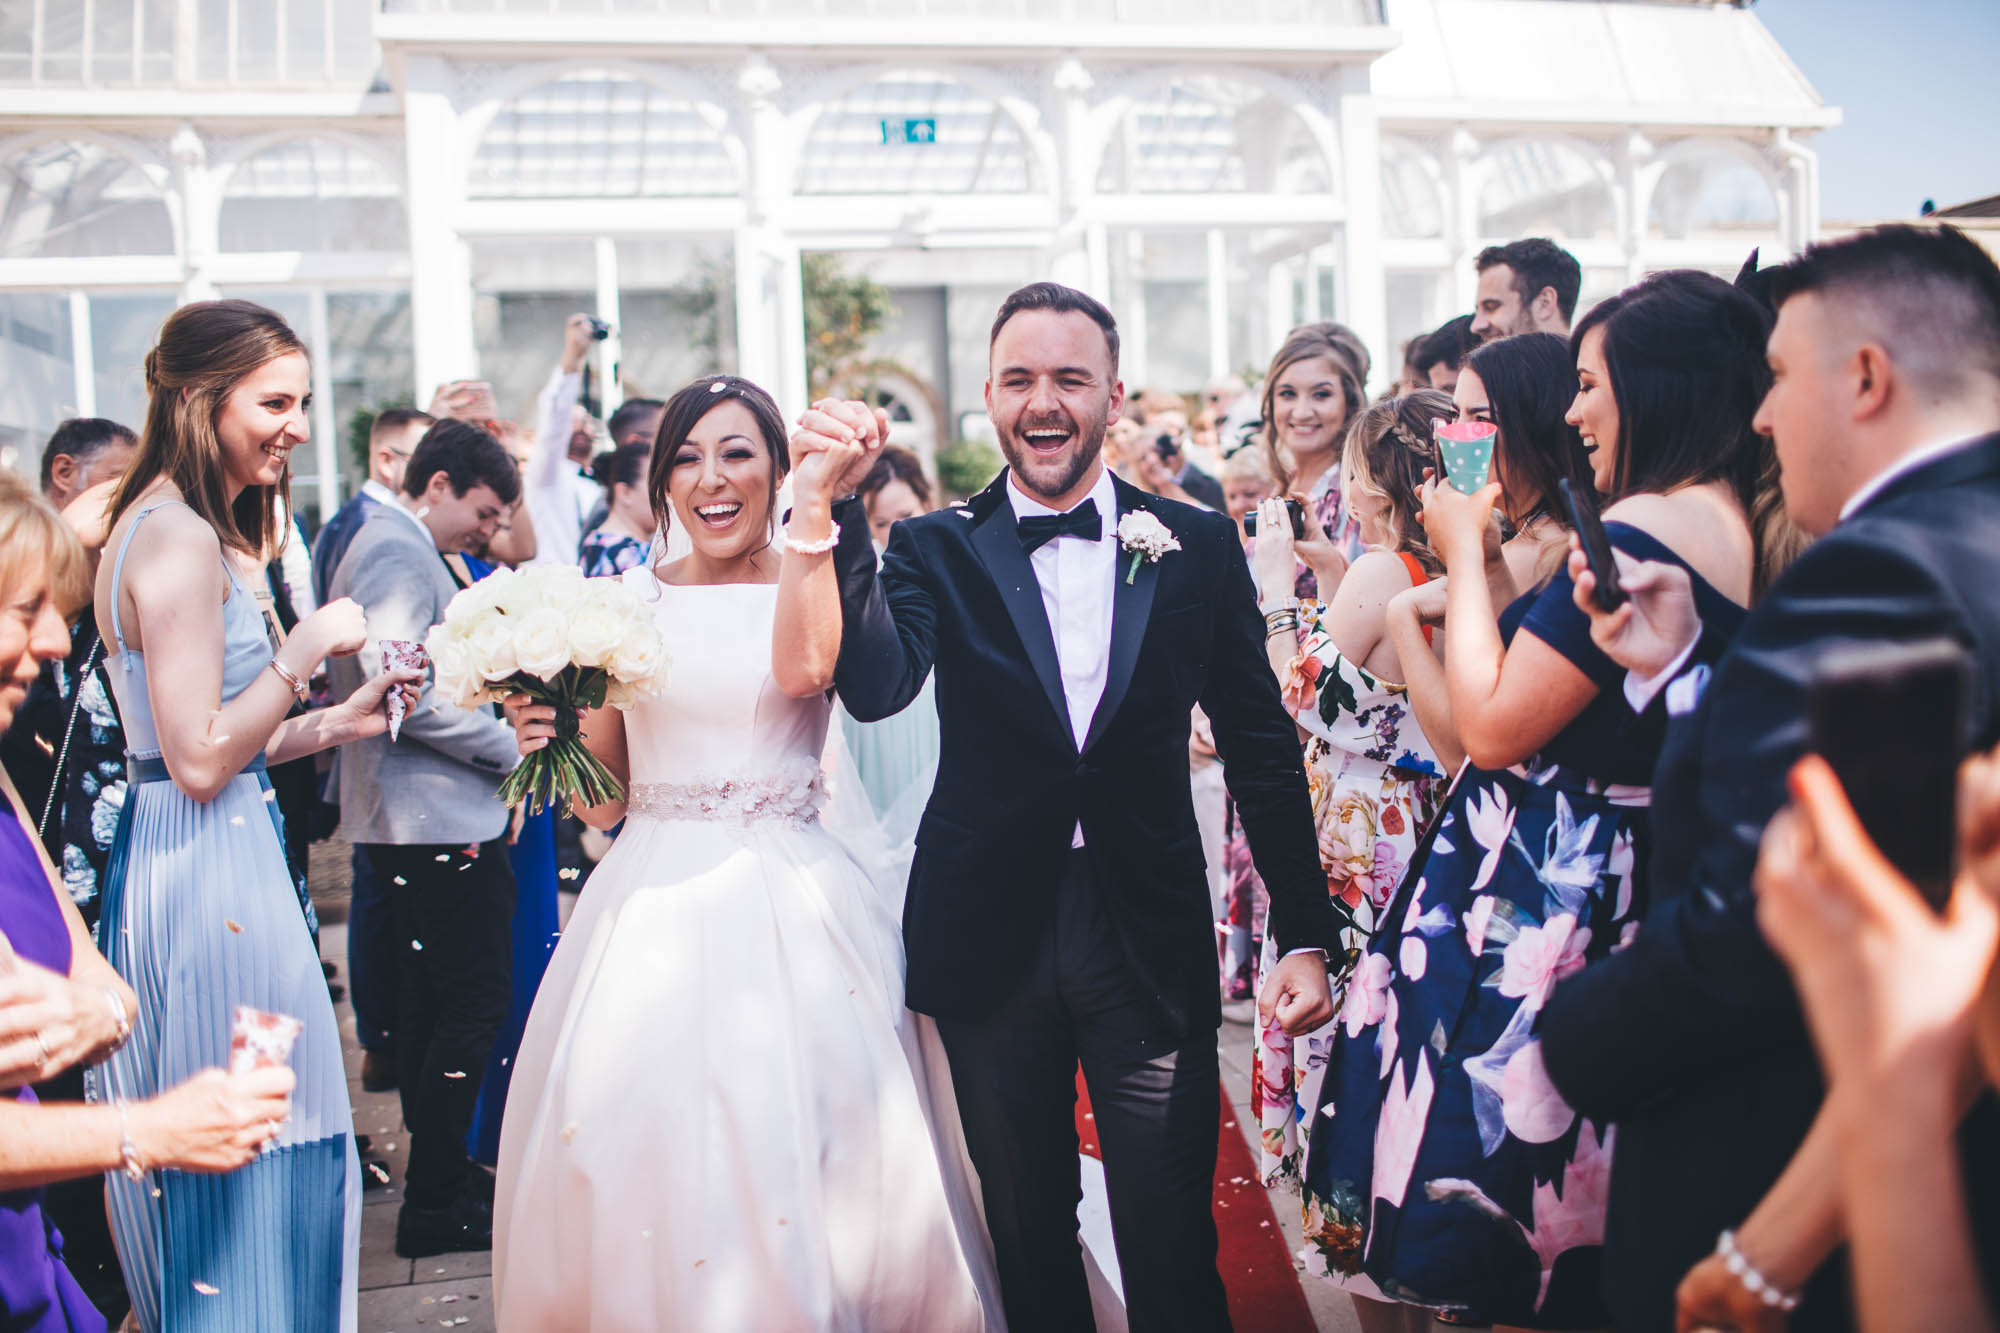 Newlyweds smile with glee as they leave the wedding venue